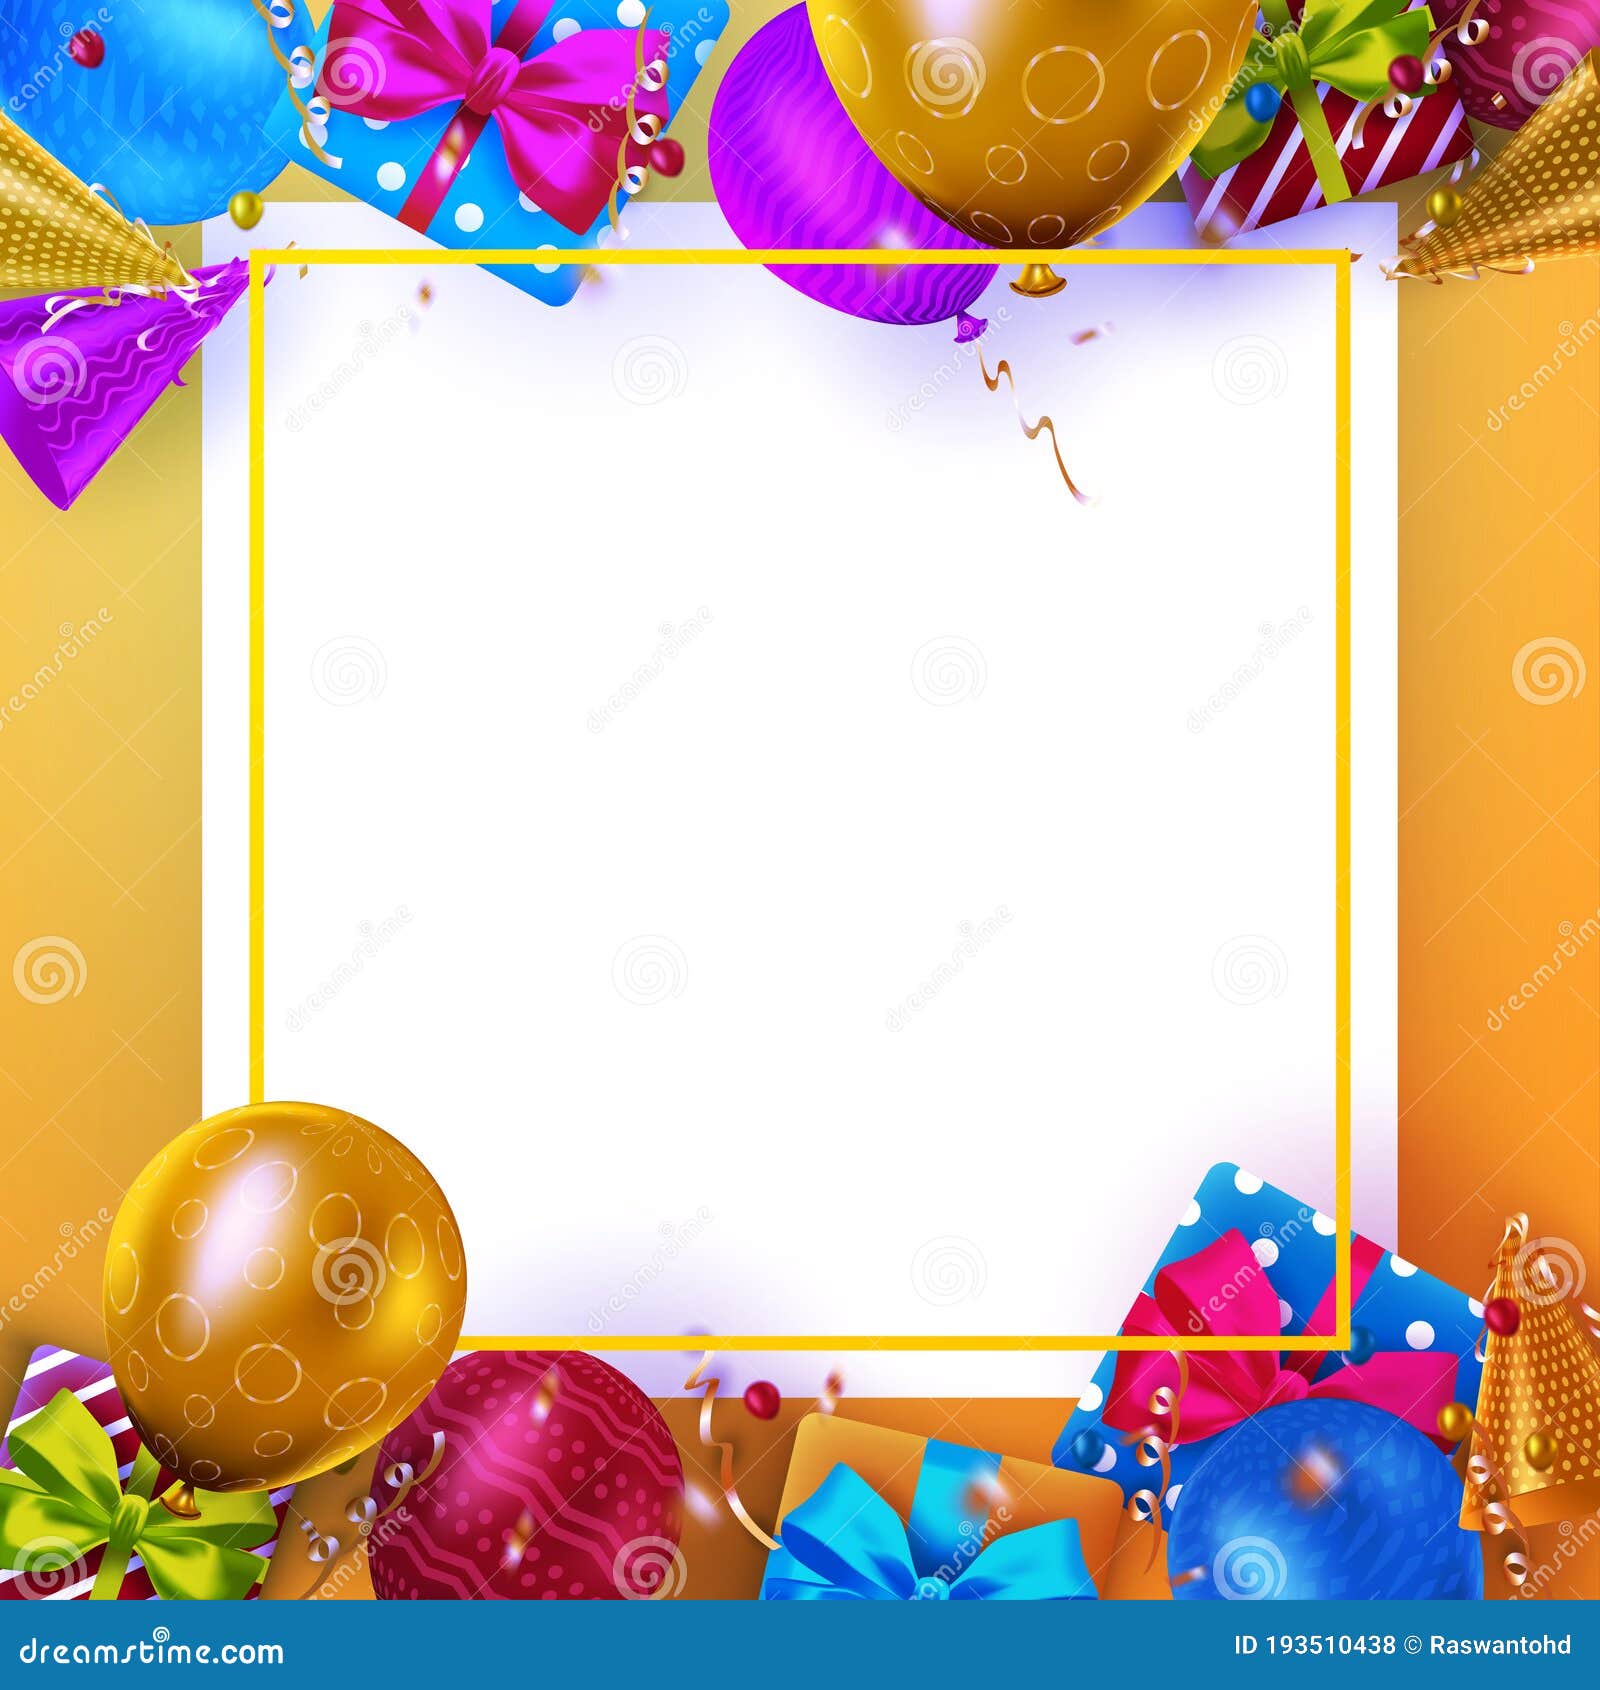 Decorative Happy Birthday Invitation Background with Realistic Balloons  Stock Vector - Illustration of abstract, celebration: 193510438